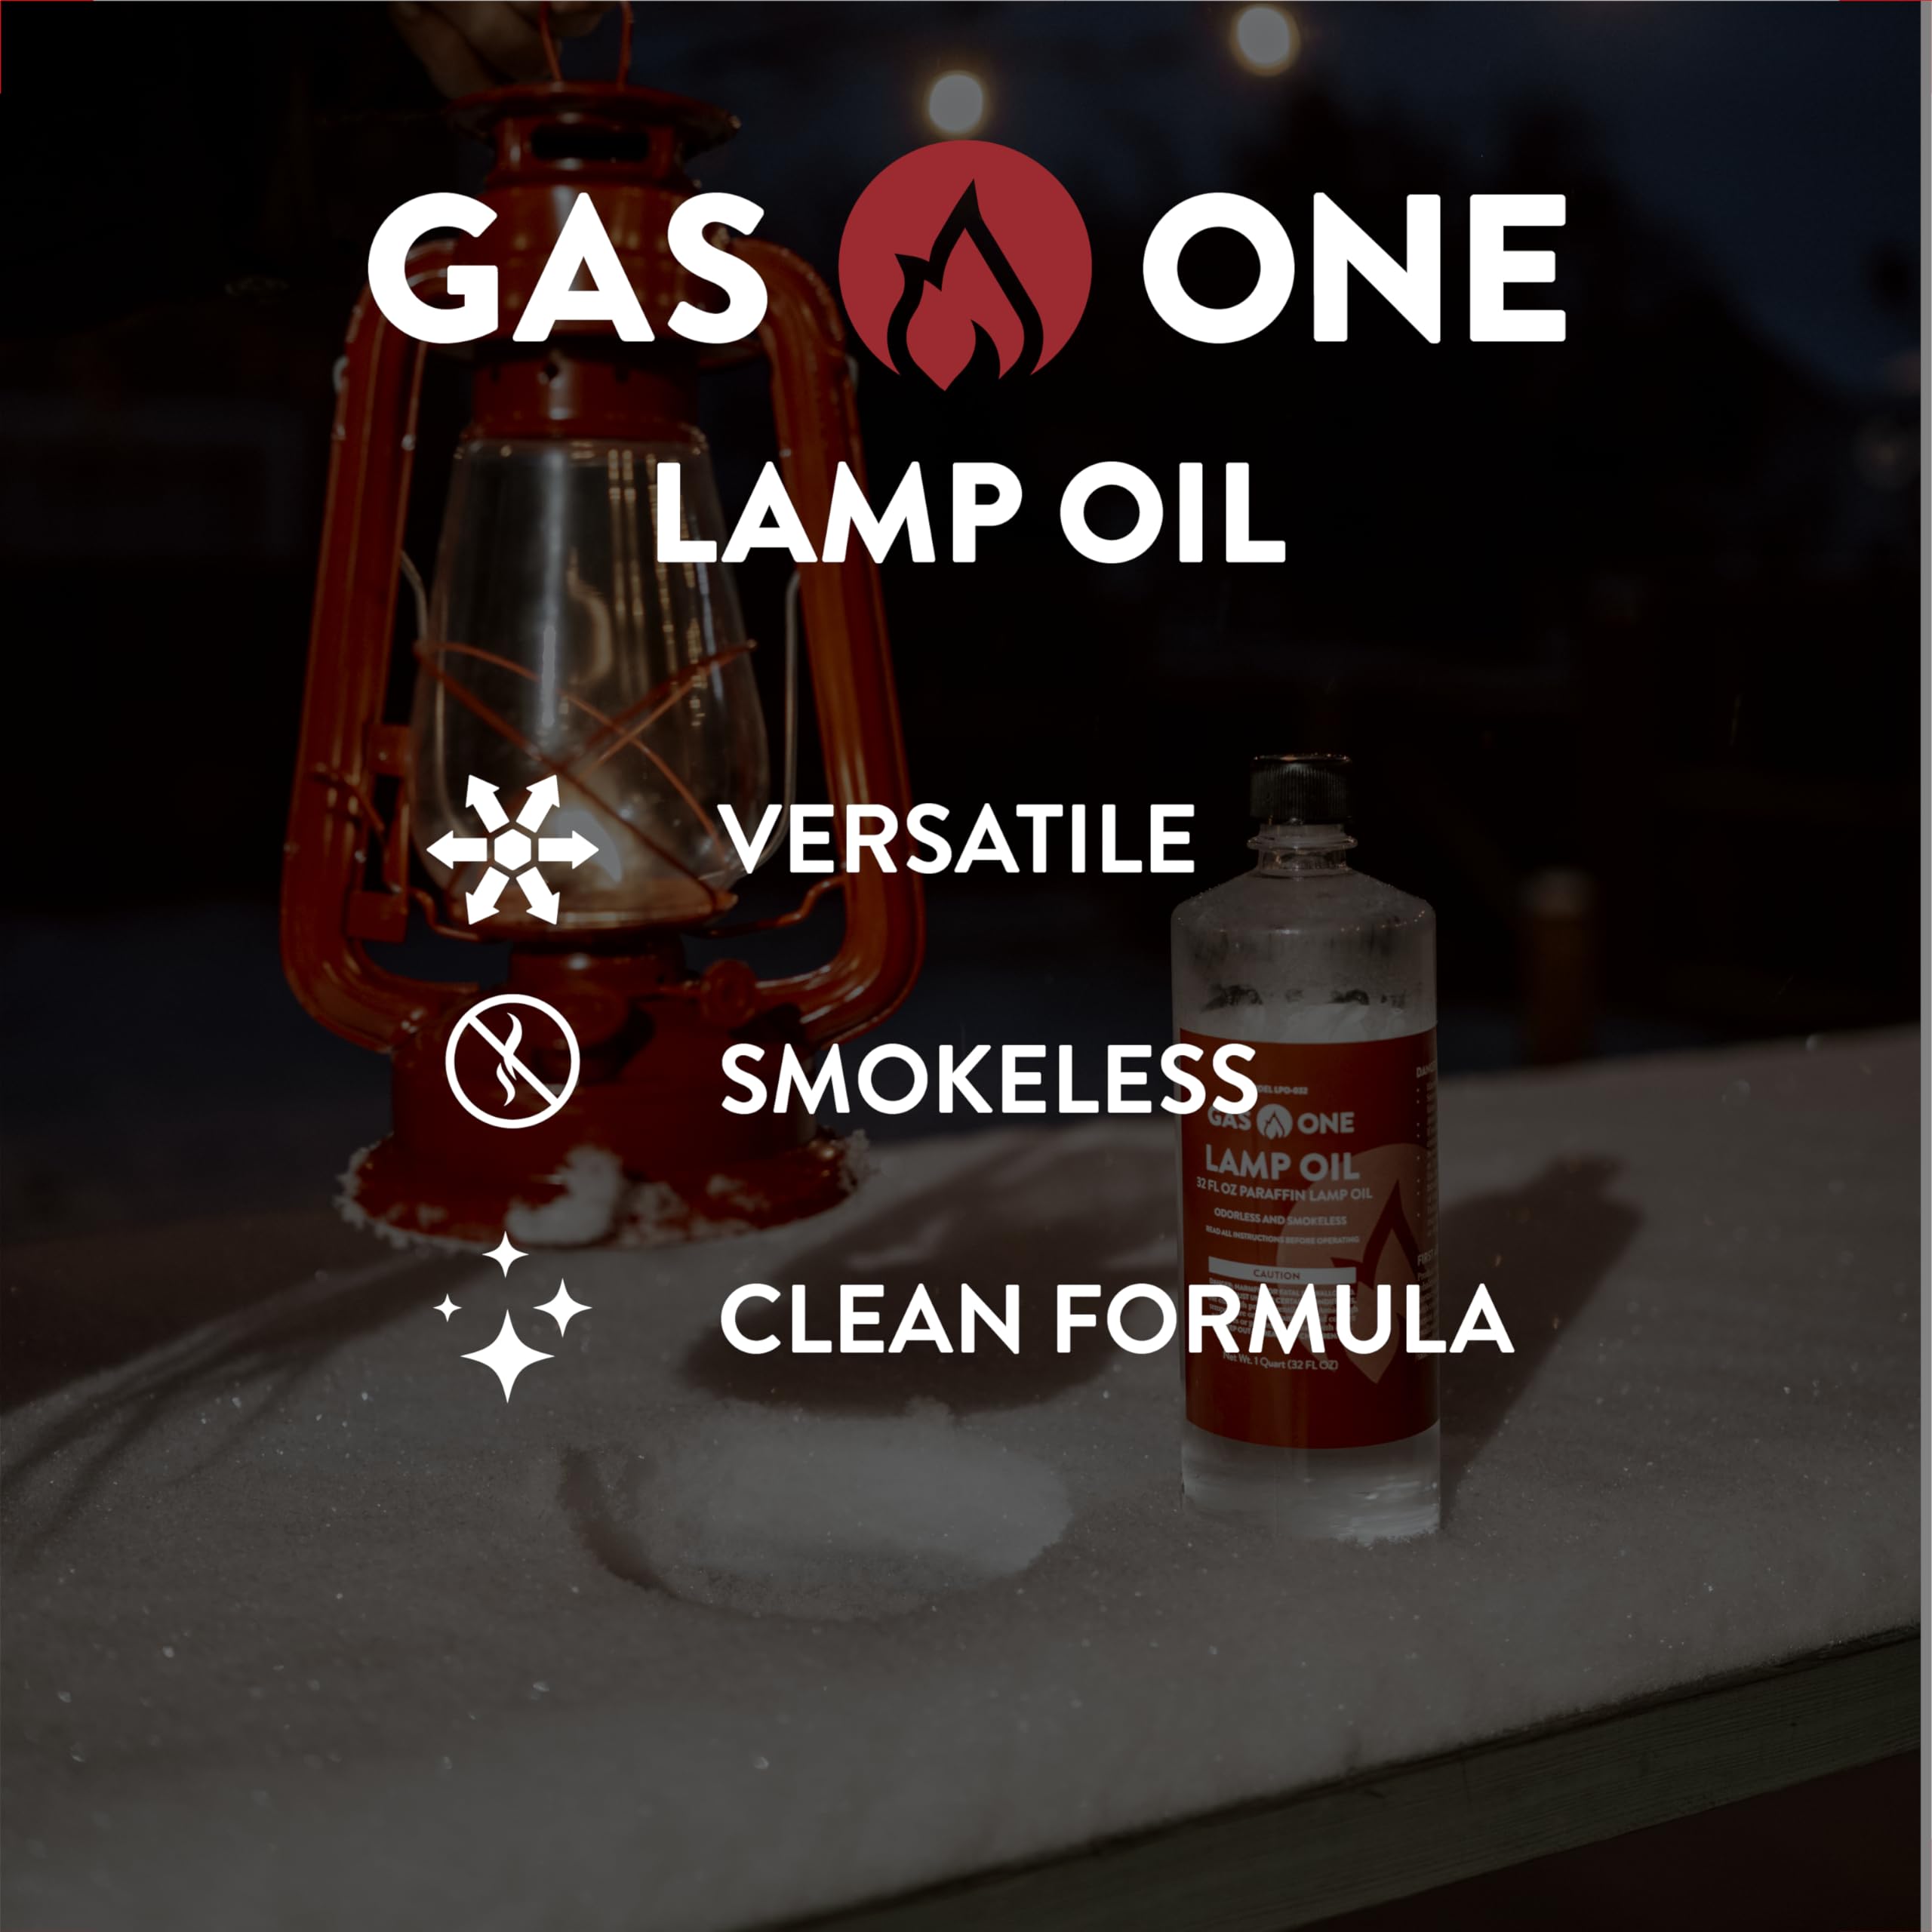 Gas One Liquid Paraffin Lamp Oil – 32oz Clear Oil Lamp – Multifunctional Lamp Oil Smokeless Odorless Indoor Ideal for Lamps, Lanterns, Tiki Torch – Superior Seal and Safe Packaging